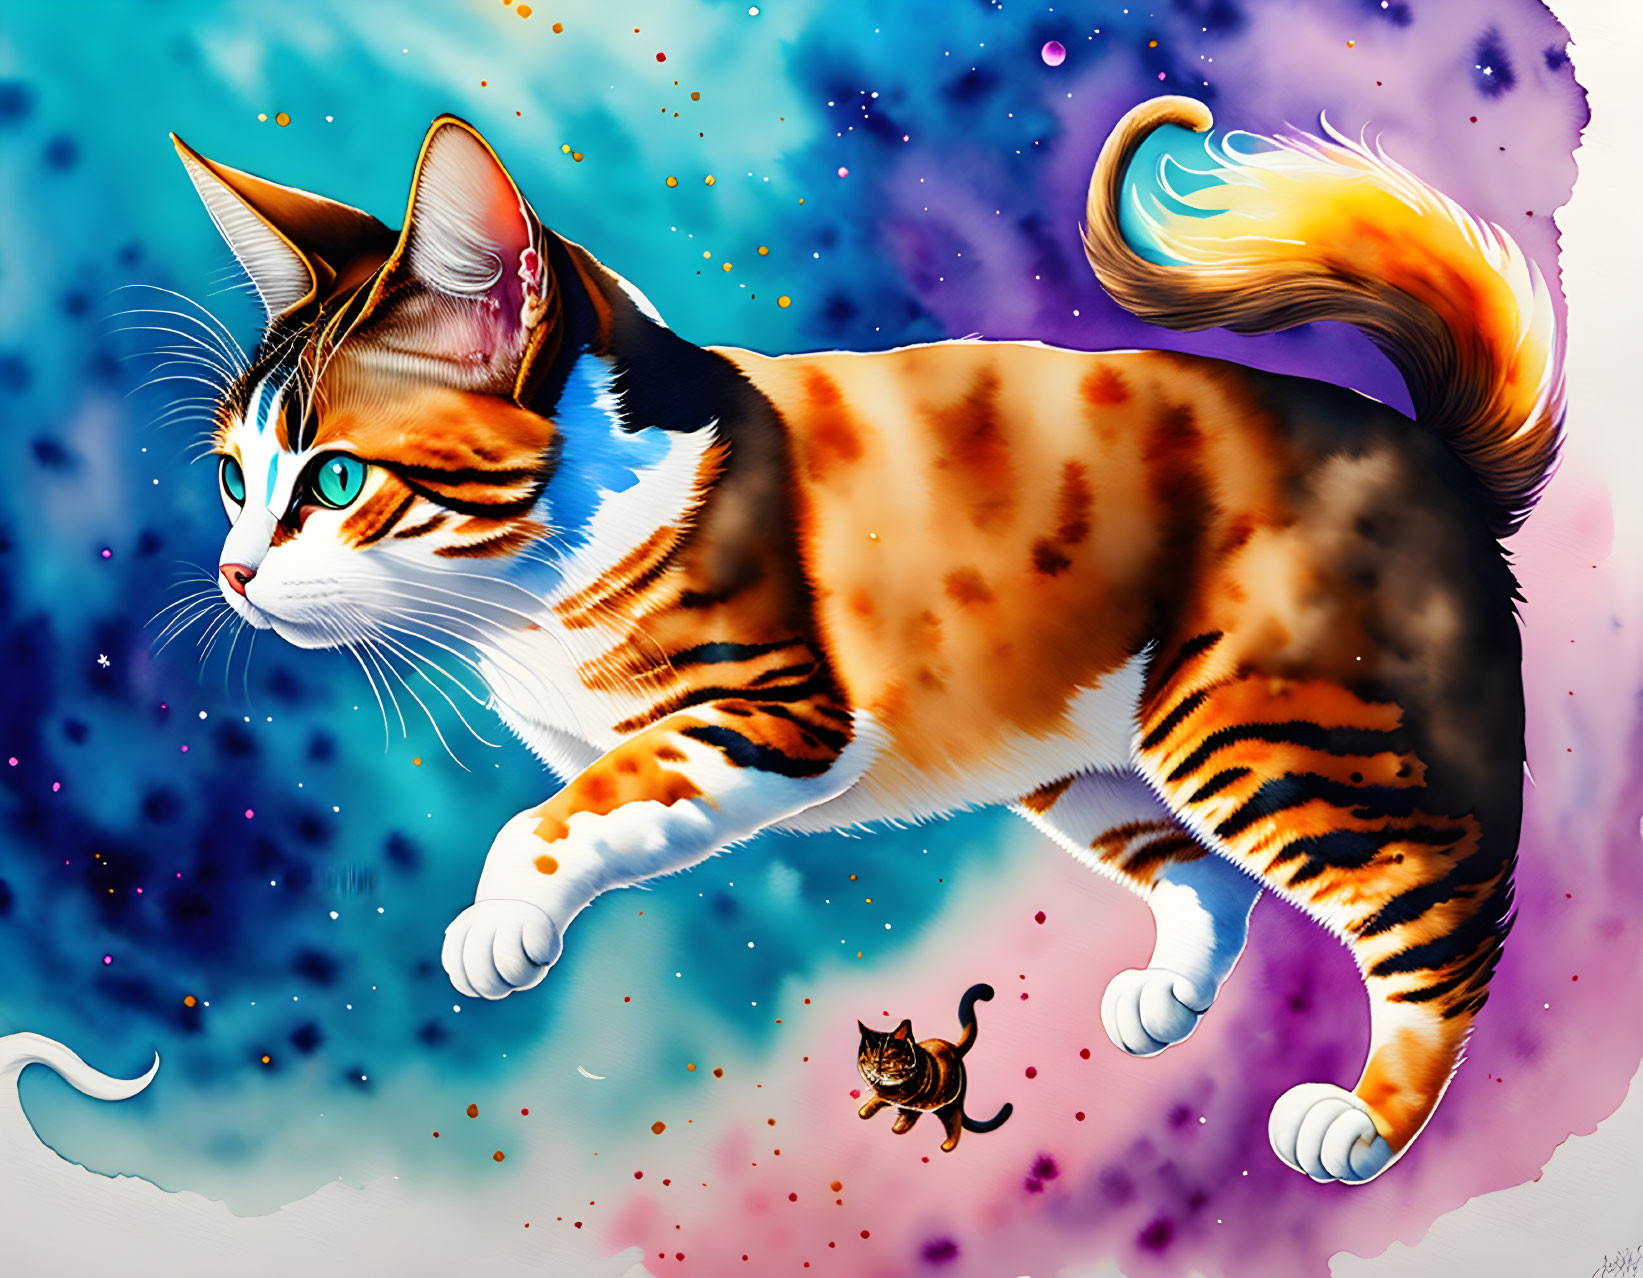 Cats in outerspace